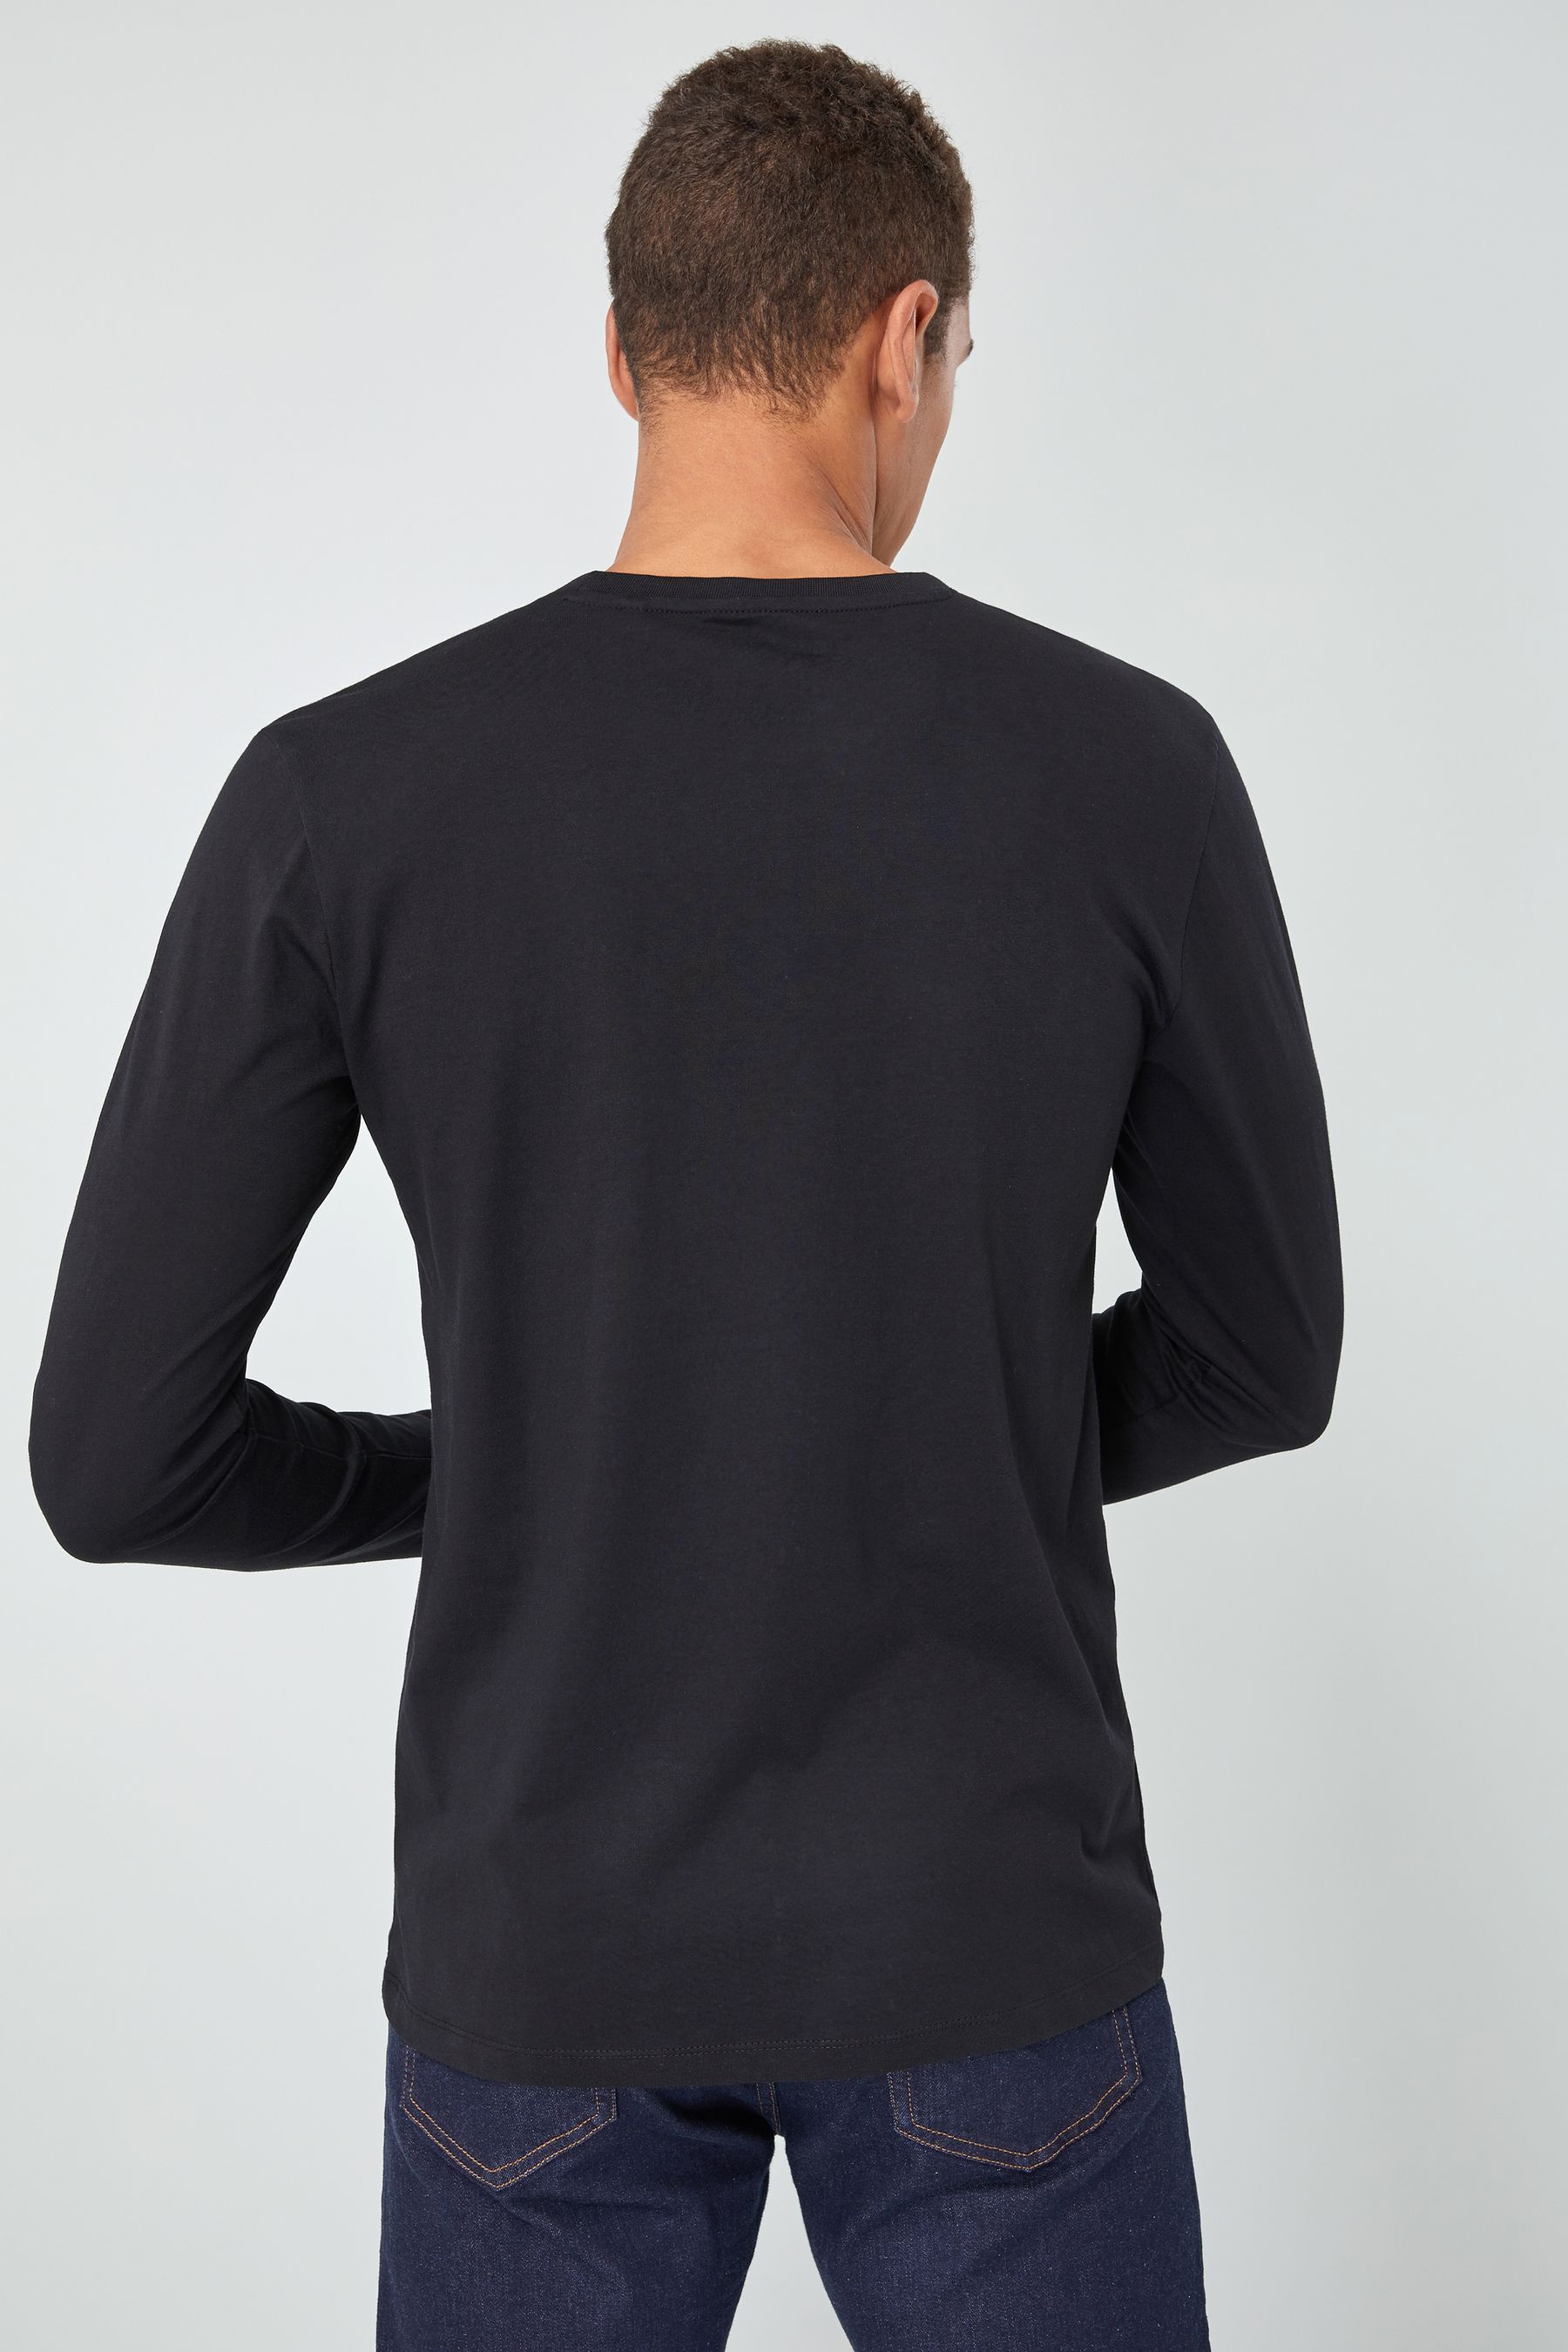 Buy Black Long Sleeve Crew Neck T-Shirt from the Next UK online shop